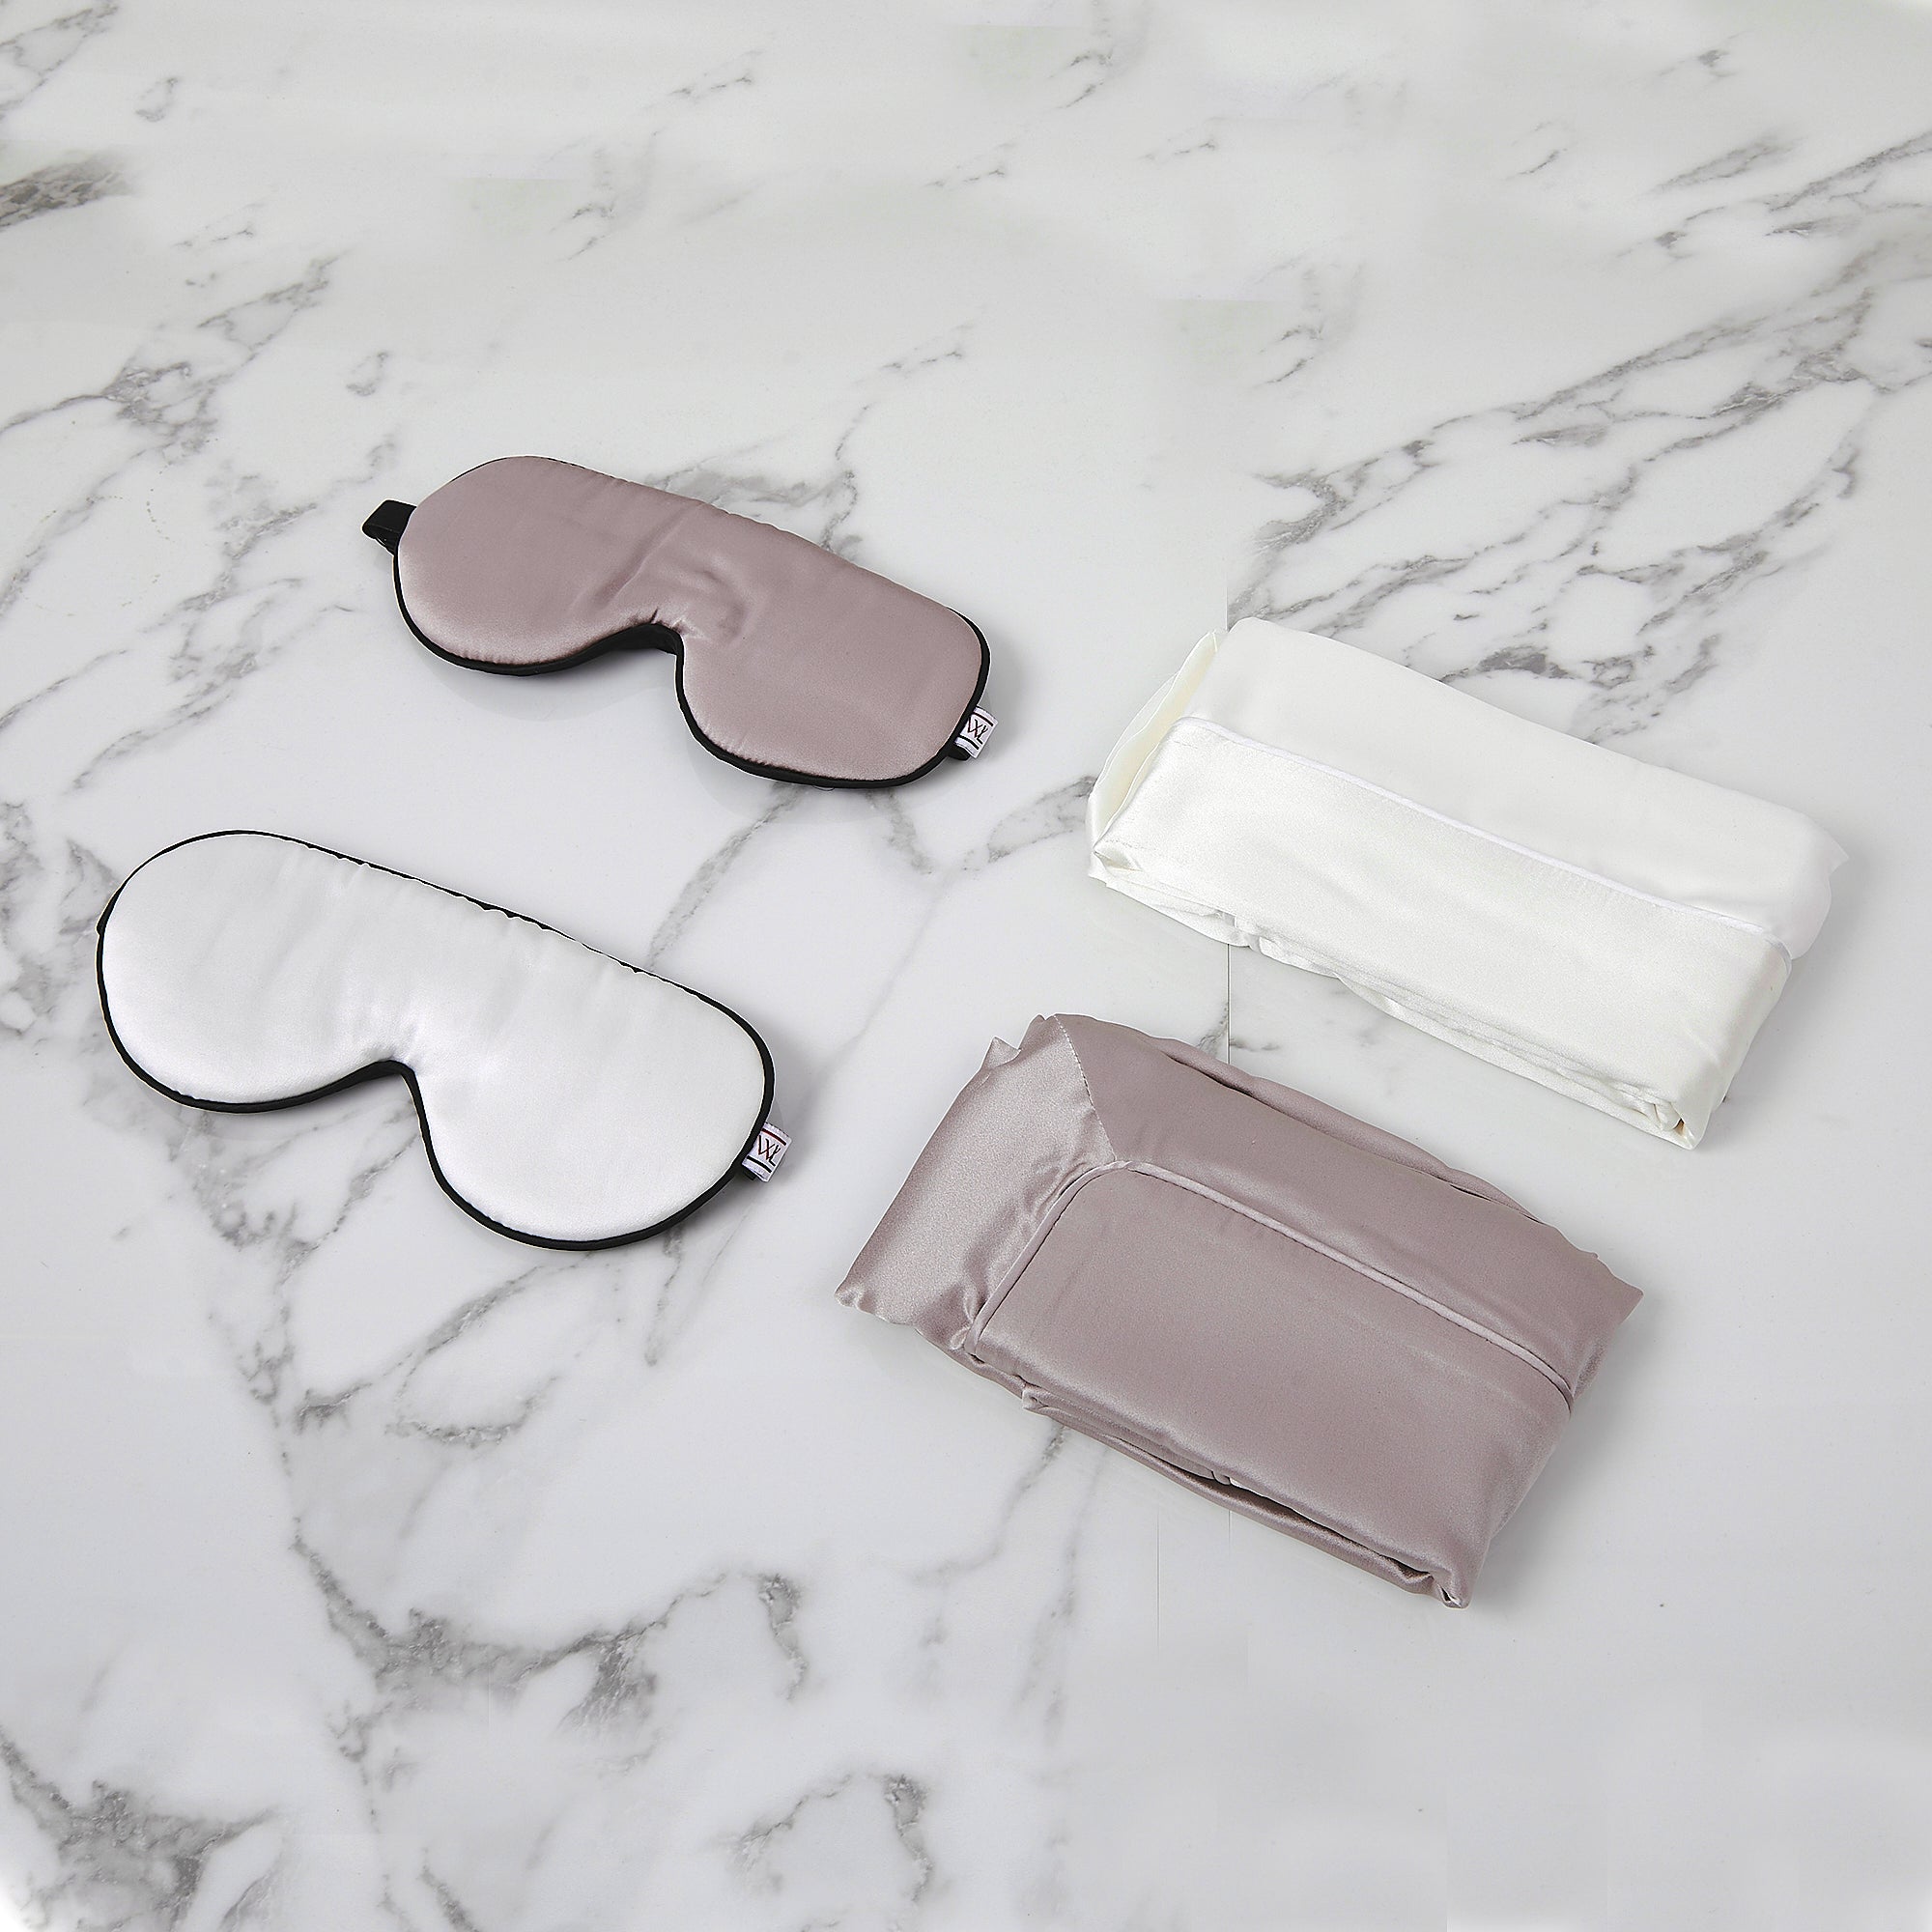 A photo of a pearl grey silk eye mask and pillowcase and a white eye mask and pillowcase  